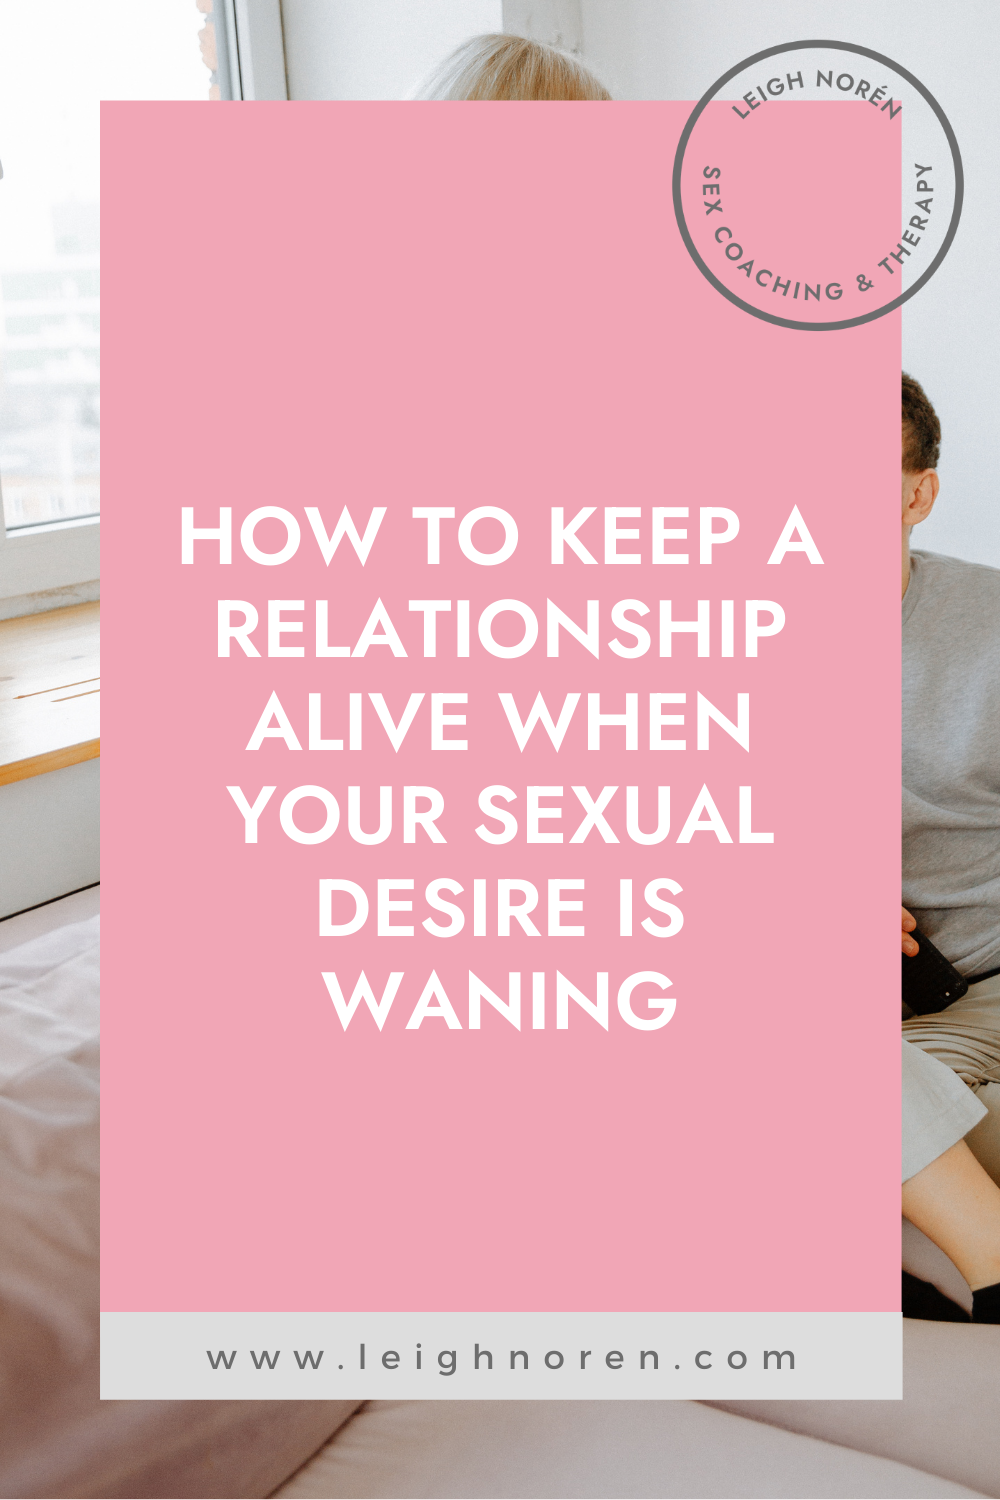 How To Keep A Relationship Alive When Your Sexual Desire Is Waning